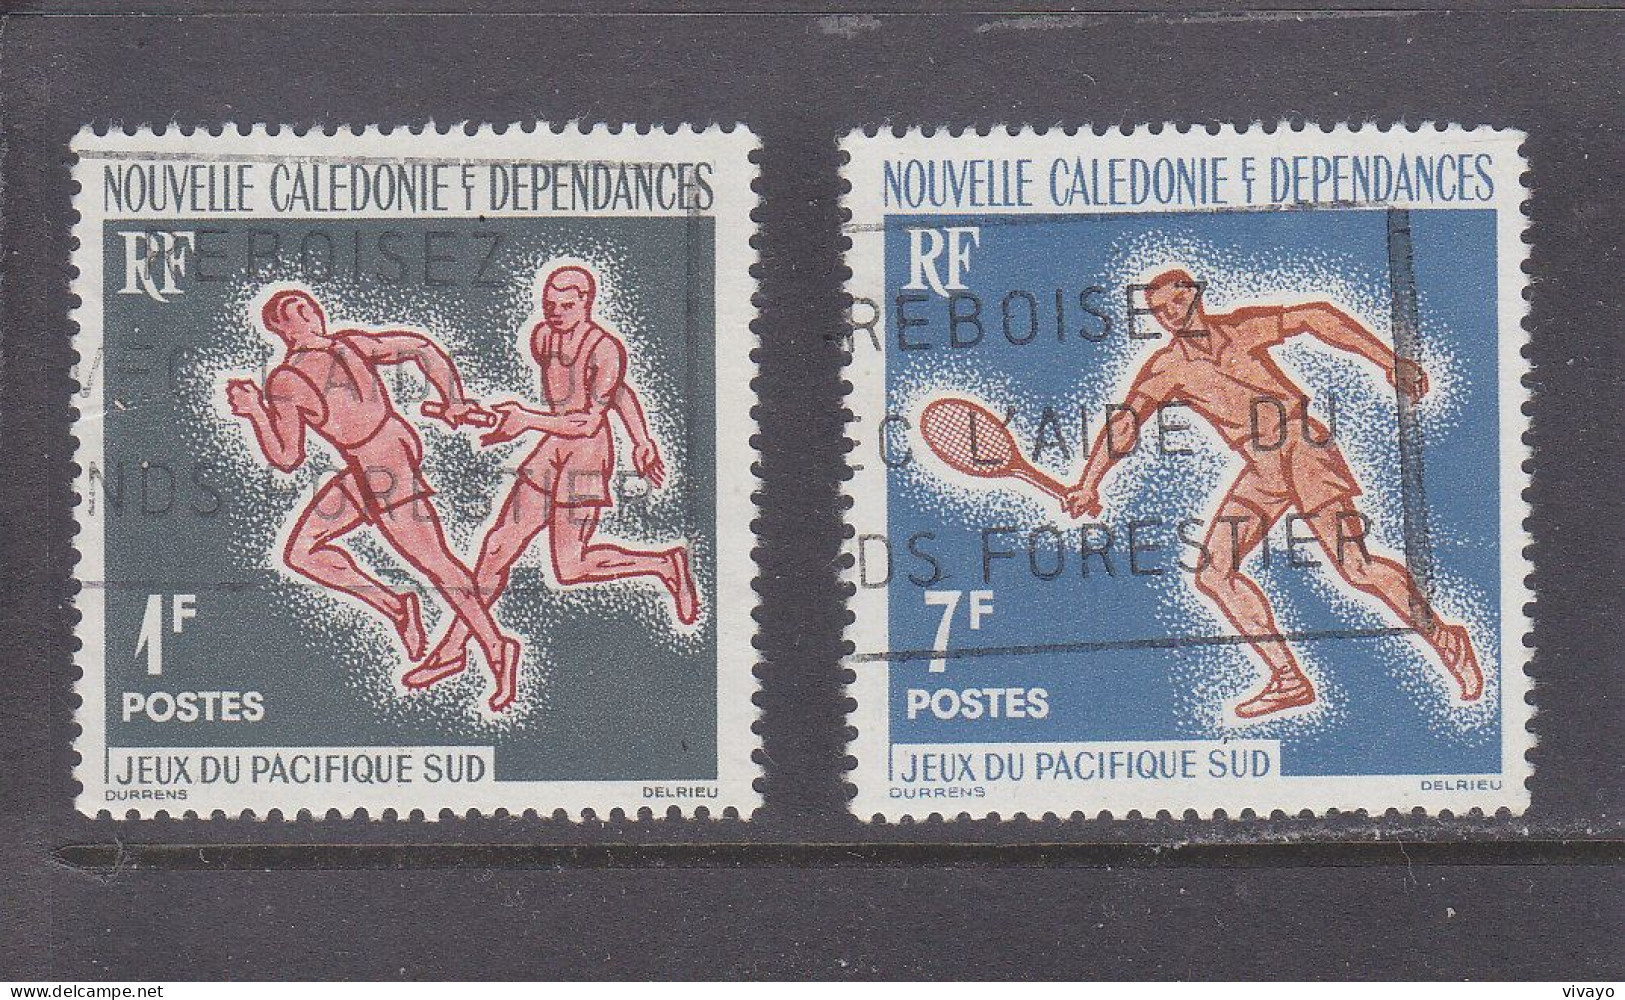 NOUVELLE CALEDONIE - O / FINE CANCELLED - 1963 - SOUTH PACIFIC GAMES -  Yv. 308/9  -   Mi. 388/9 - Usati